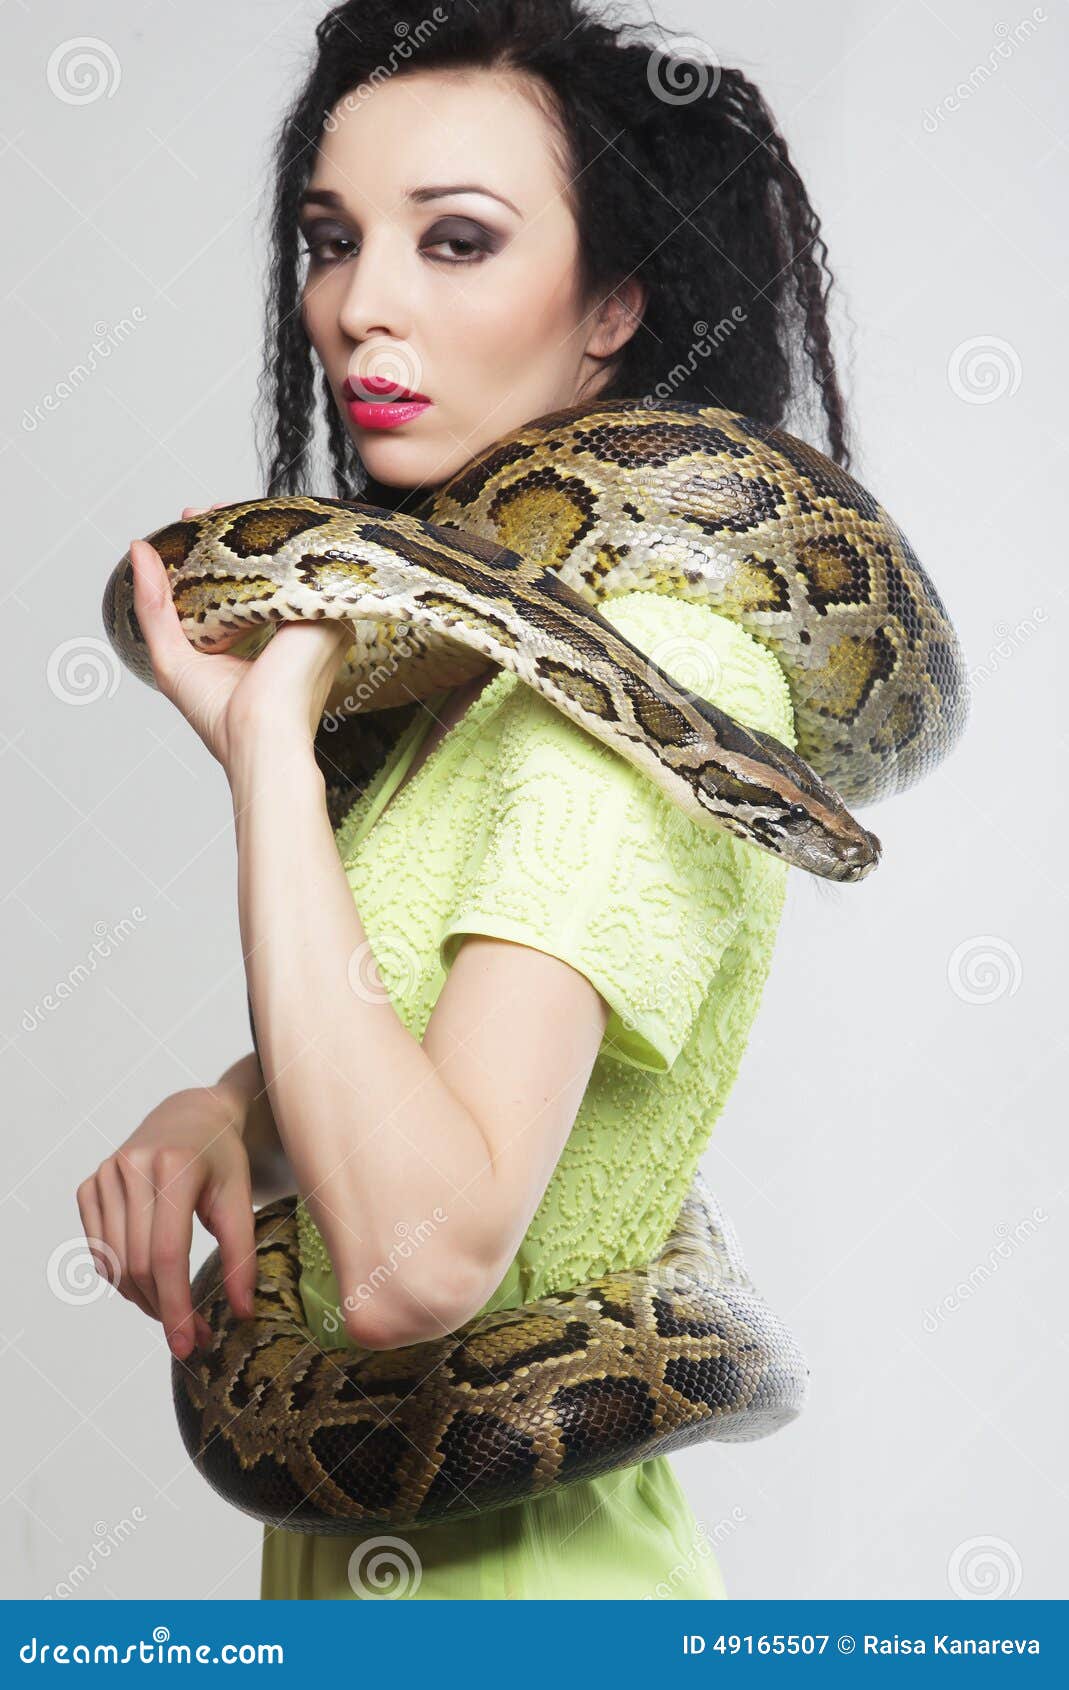 Beautiful Woman With A Snake Stock Photo - Image: 49165507